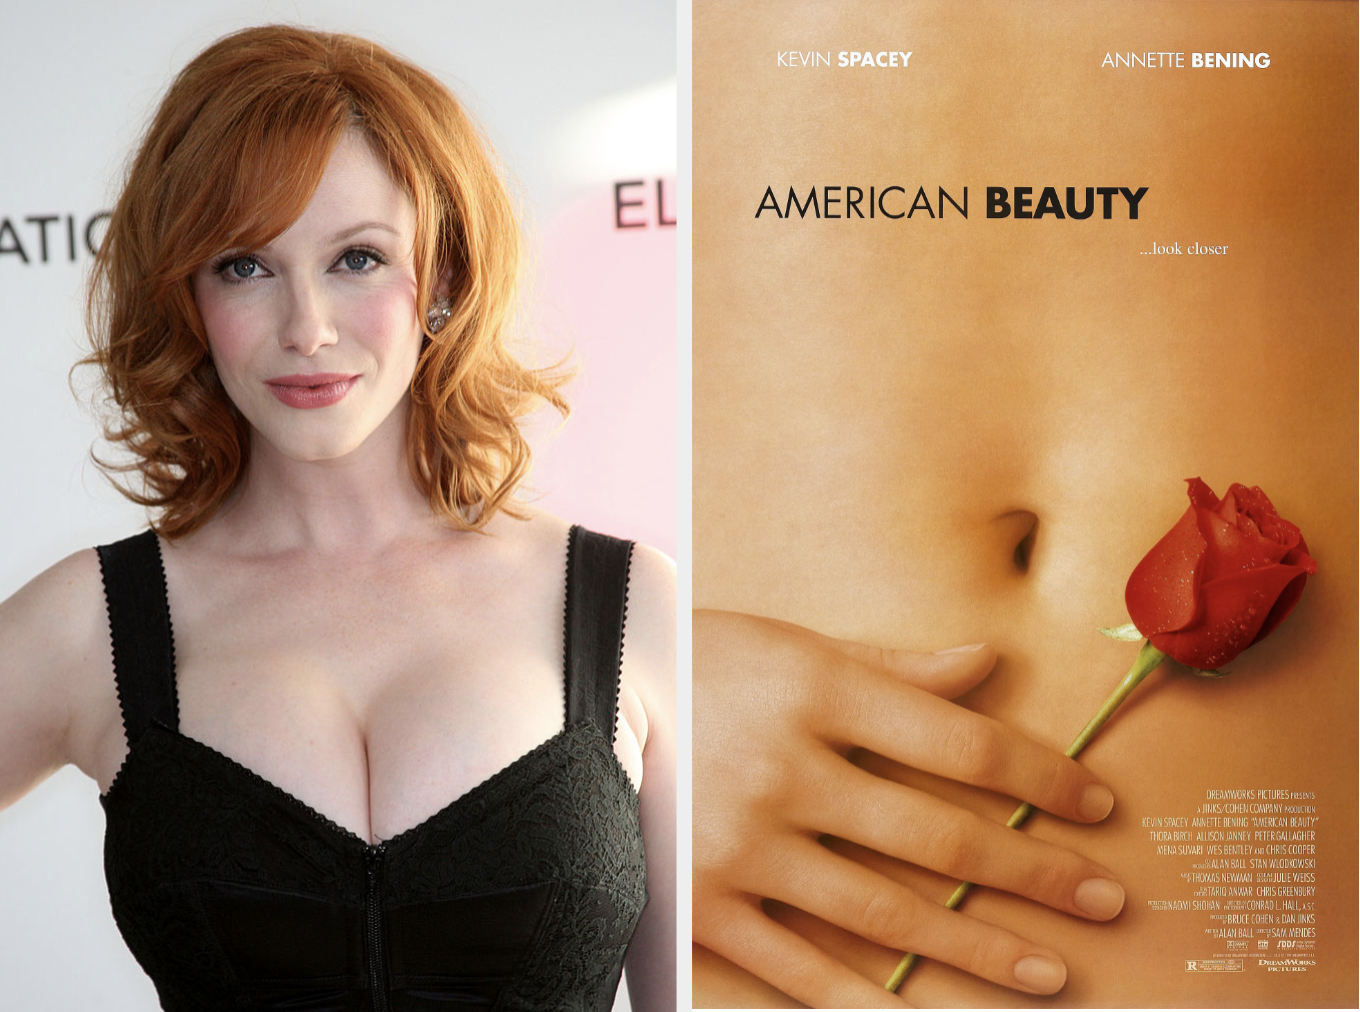 Christina alongside the movie&#x27;s poster showing a rose resting on a woman&#x27;s abdomen